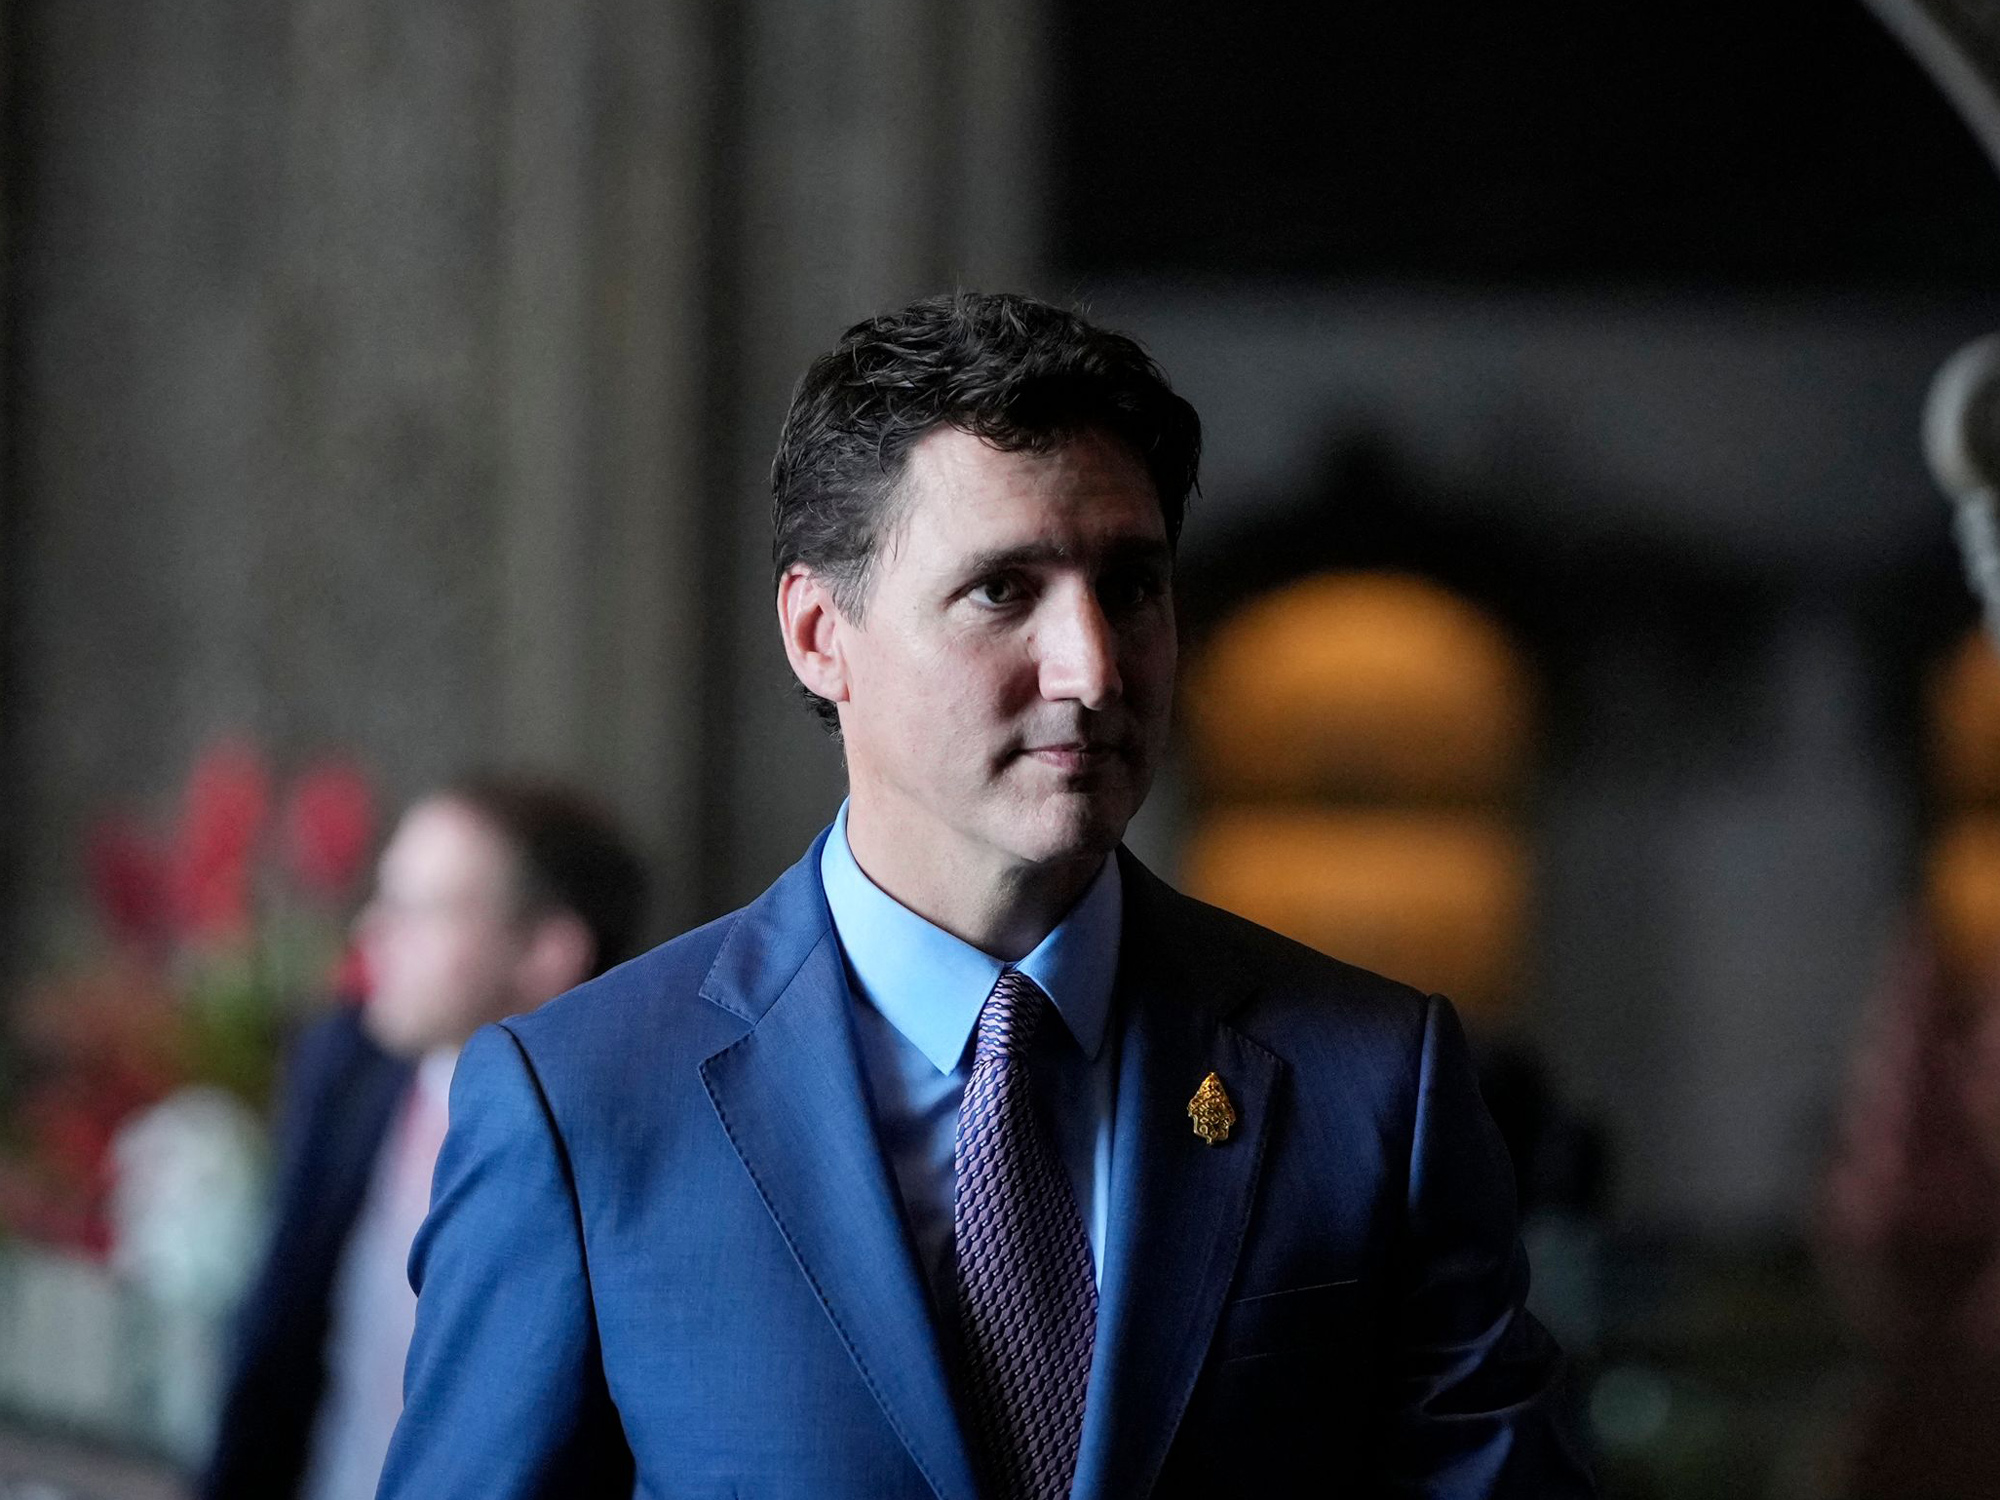 Justin Trudeau attends the G20 leaders' summit in Bali.